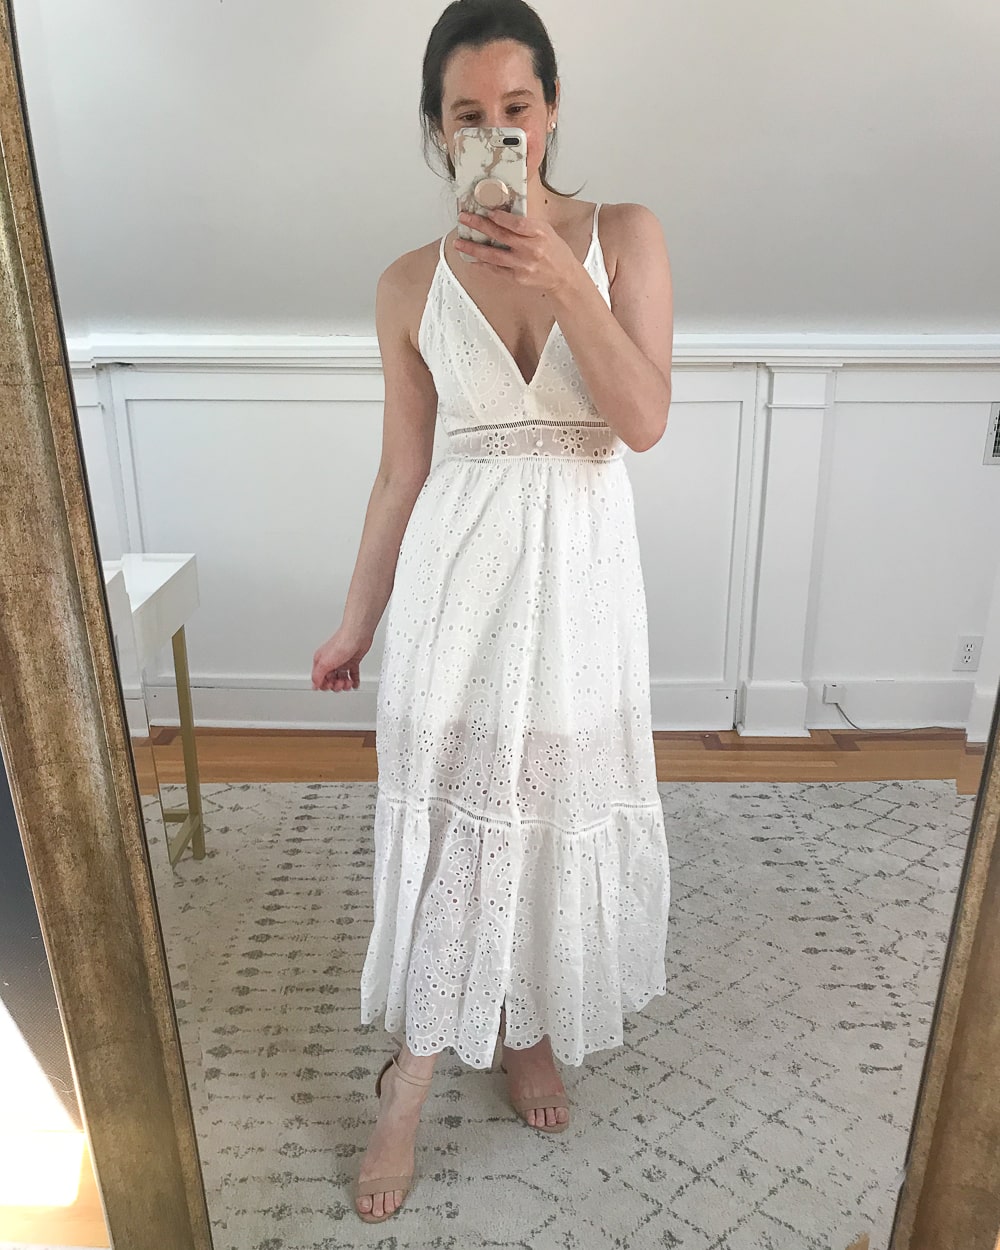 Affordable white lace maxi dress tried on by affordable fashion blogger Stephanie Ziajka on Diary of a Debutante